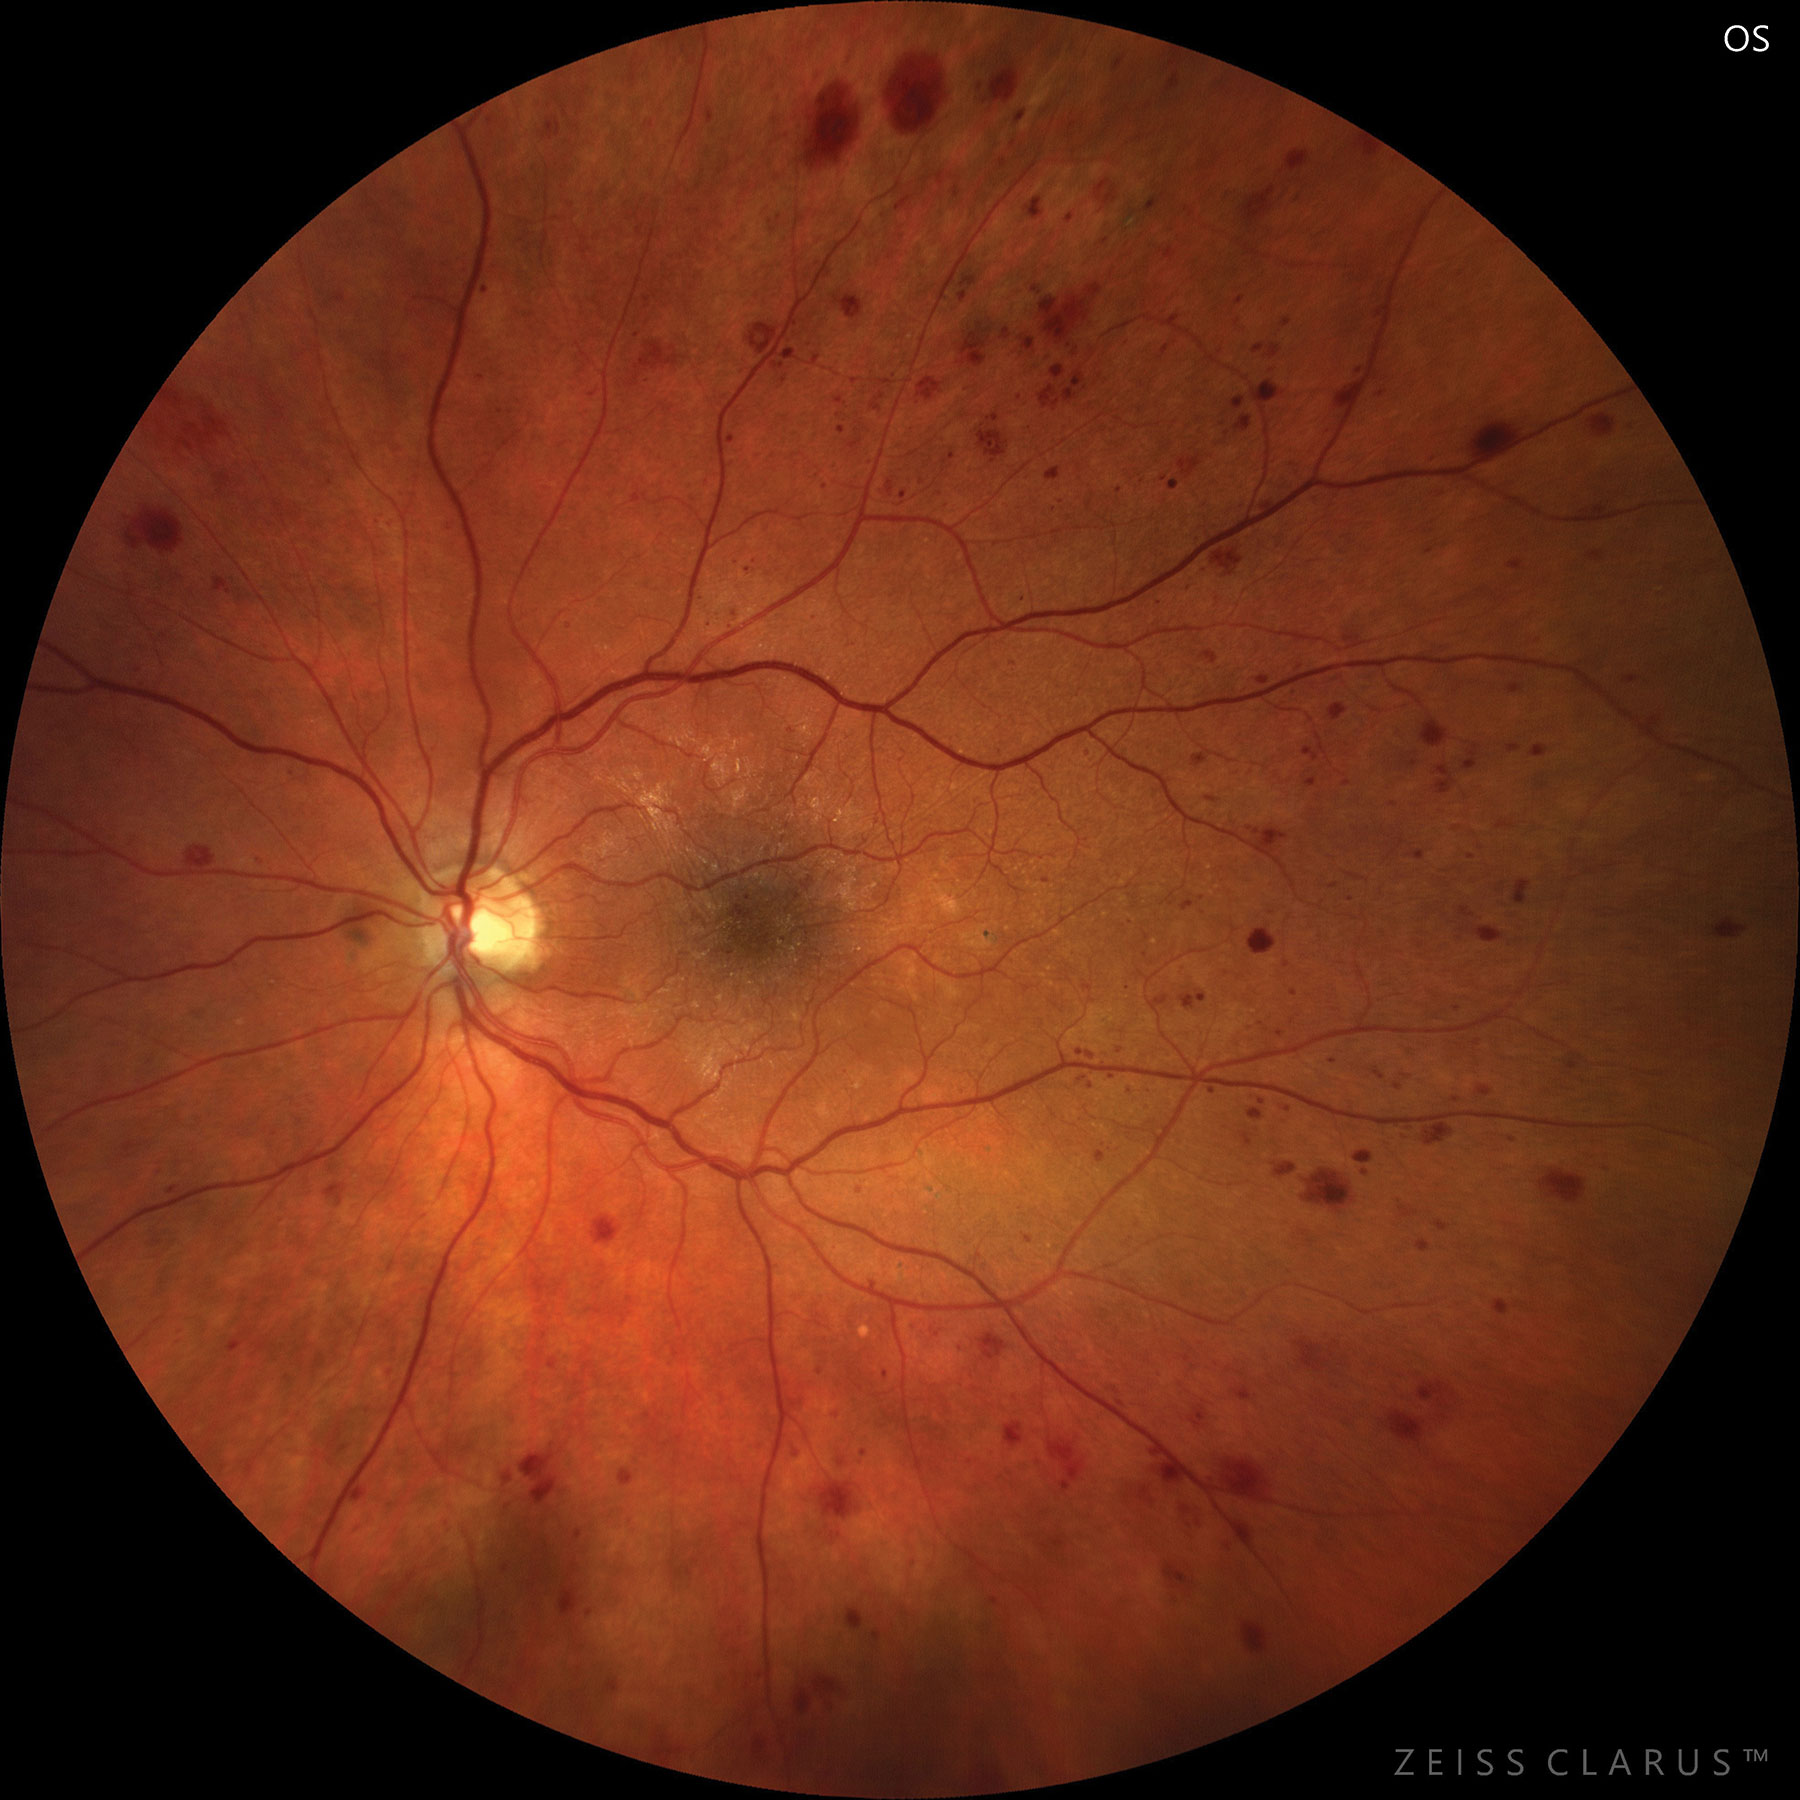 Severe NPDR based on hemorrhages and microaneurysms in four retinal quadrants.